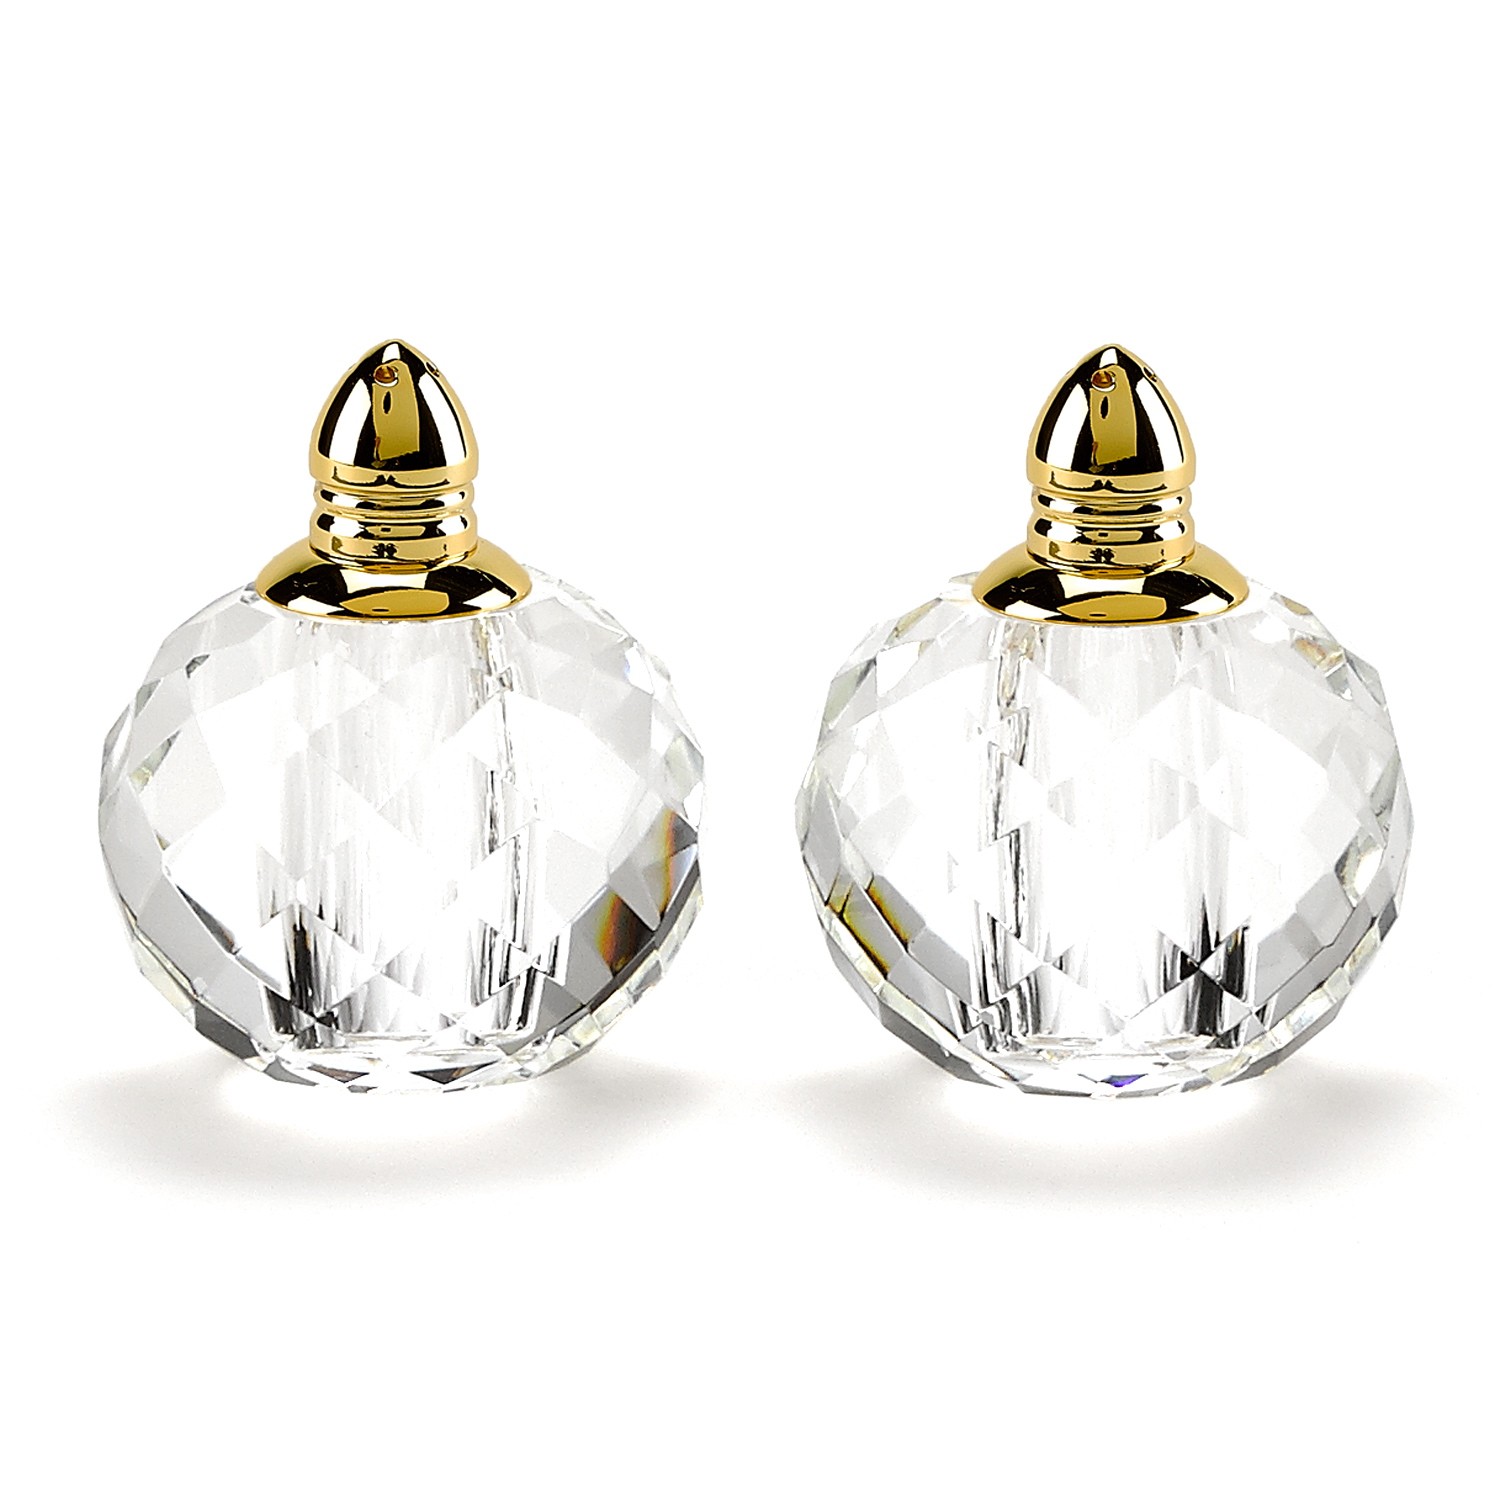 Handcrafted Optical Crystal and Gold Rounded Salt and Pepper Shakers